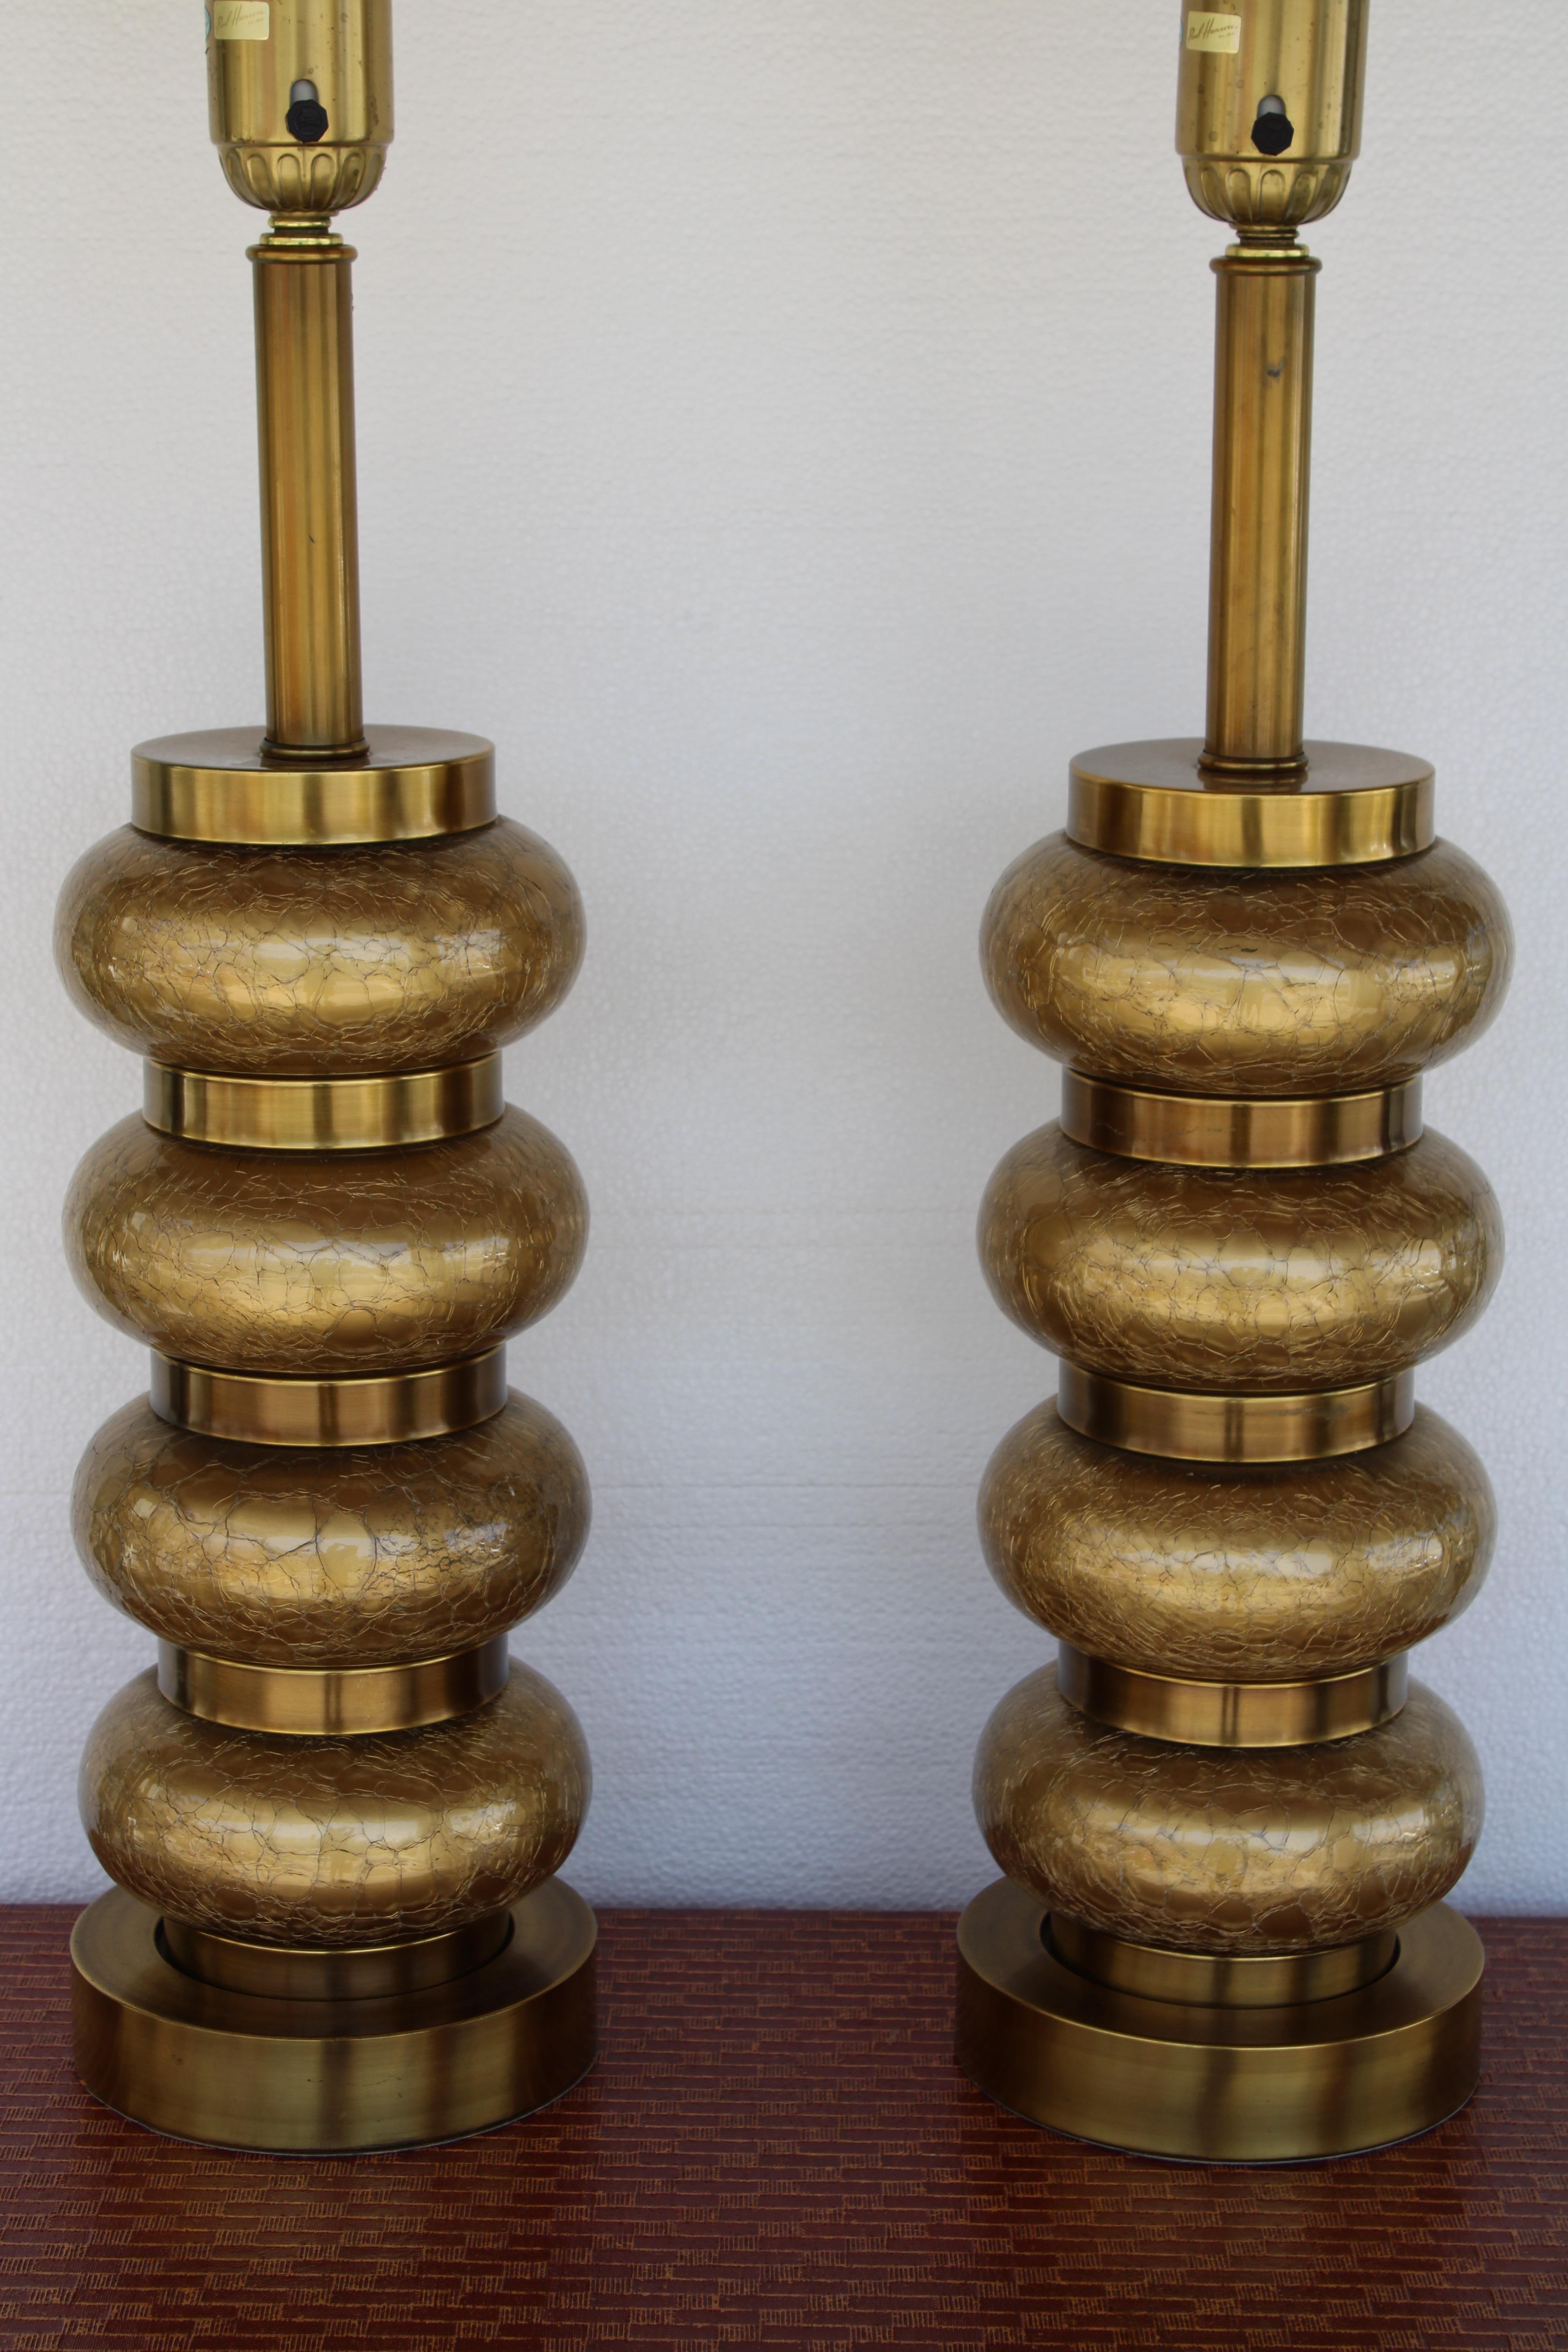 Pair of reverse gilt and brass table lamps by Paul Hanson Co. They consist of four alternating bands of gilt crackle glass ovals and patinated brass rings. Lamp measures 36.5